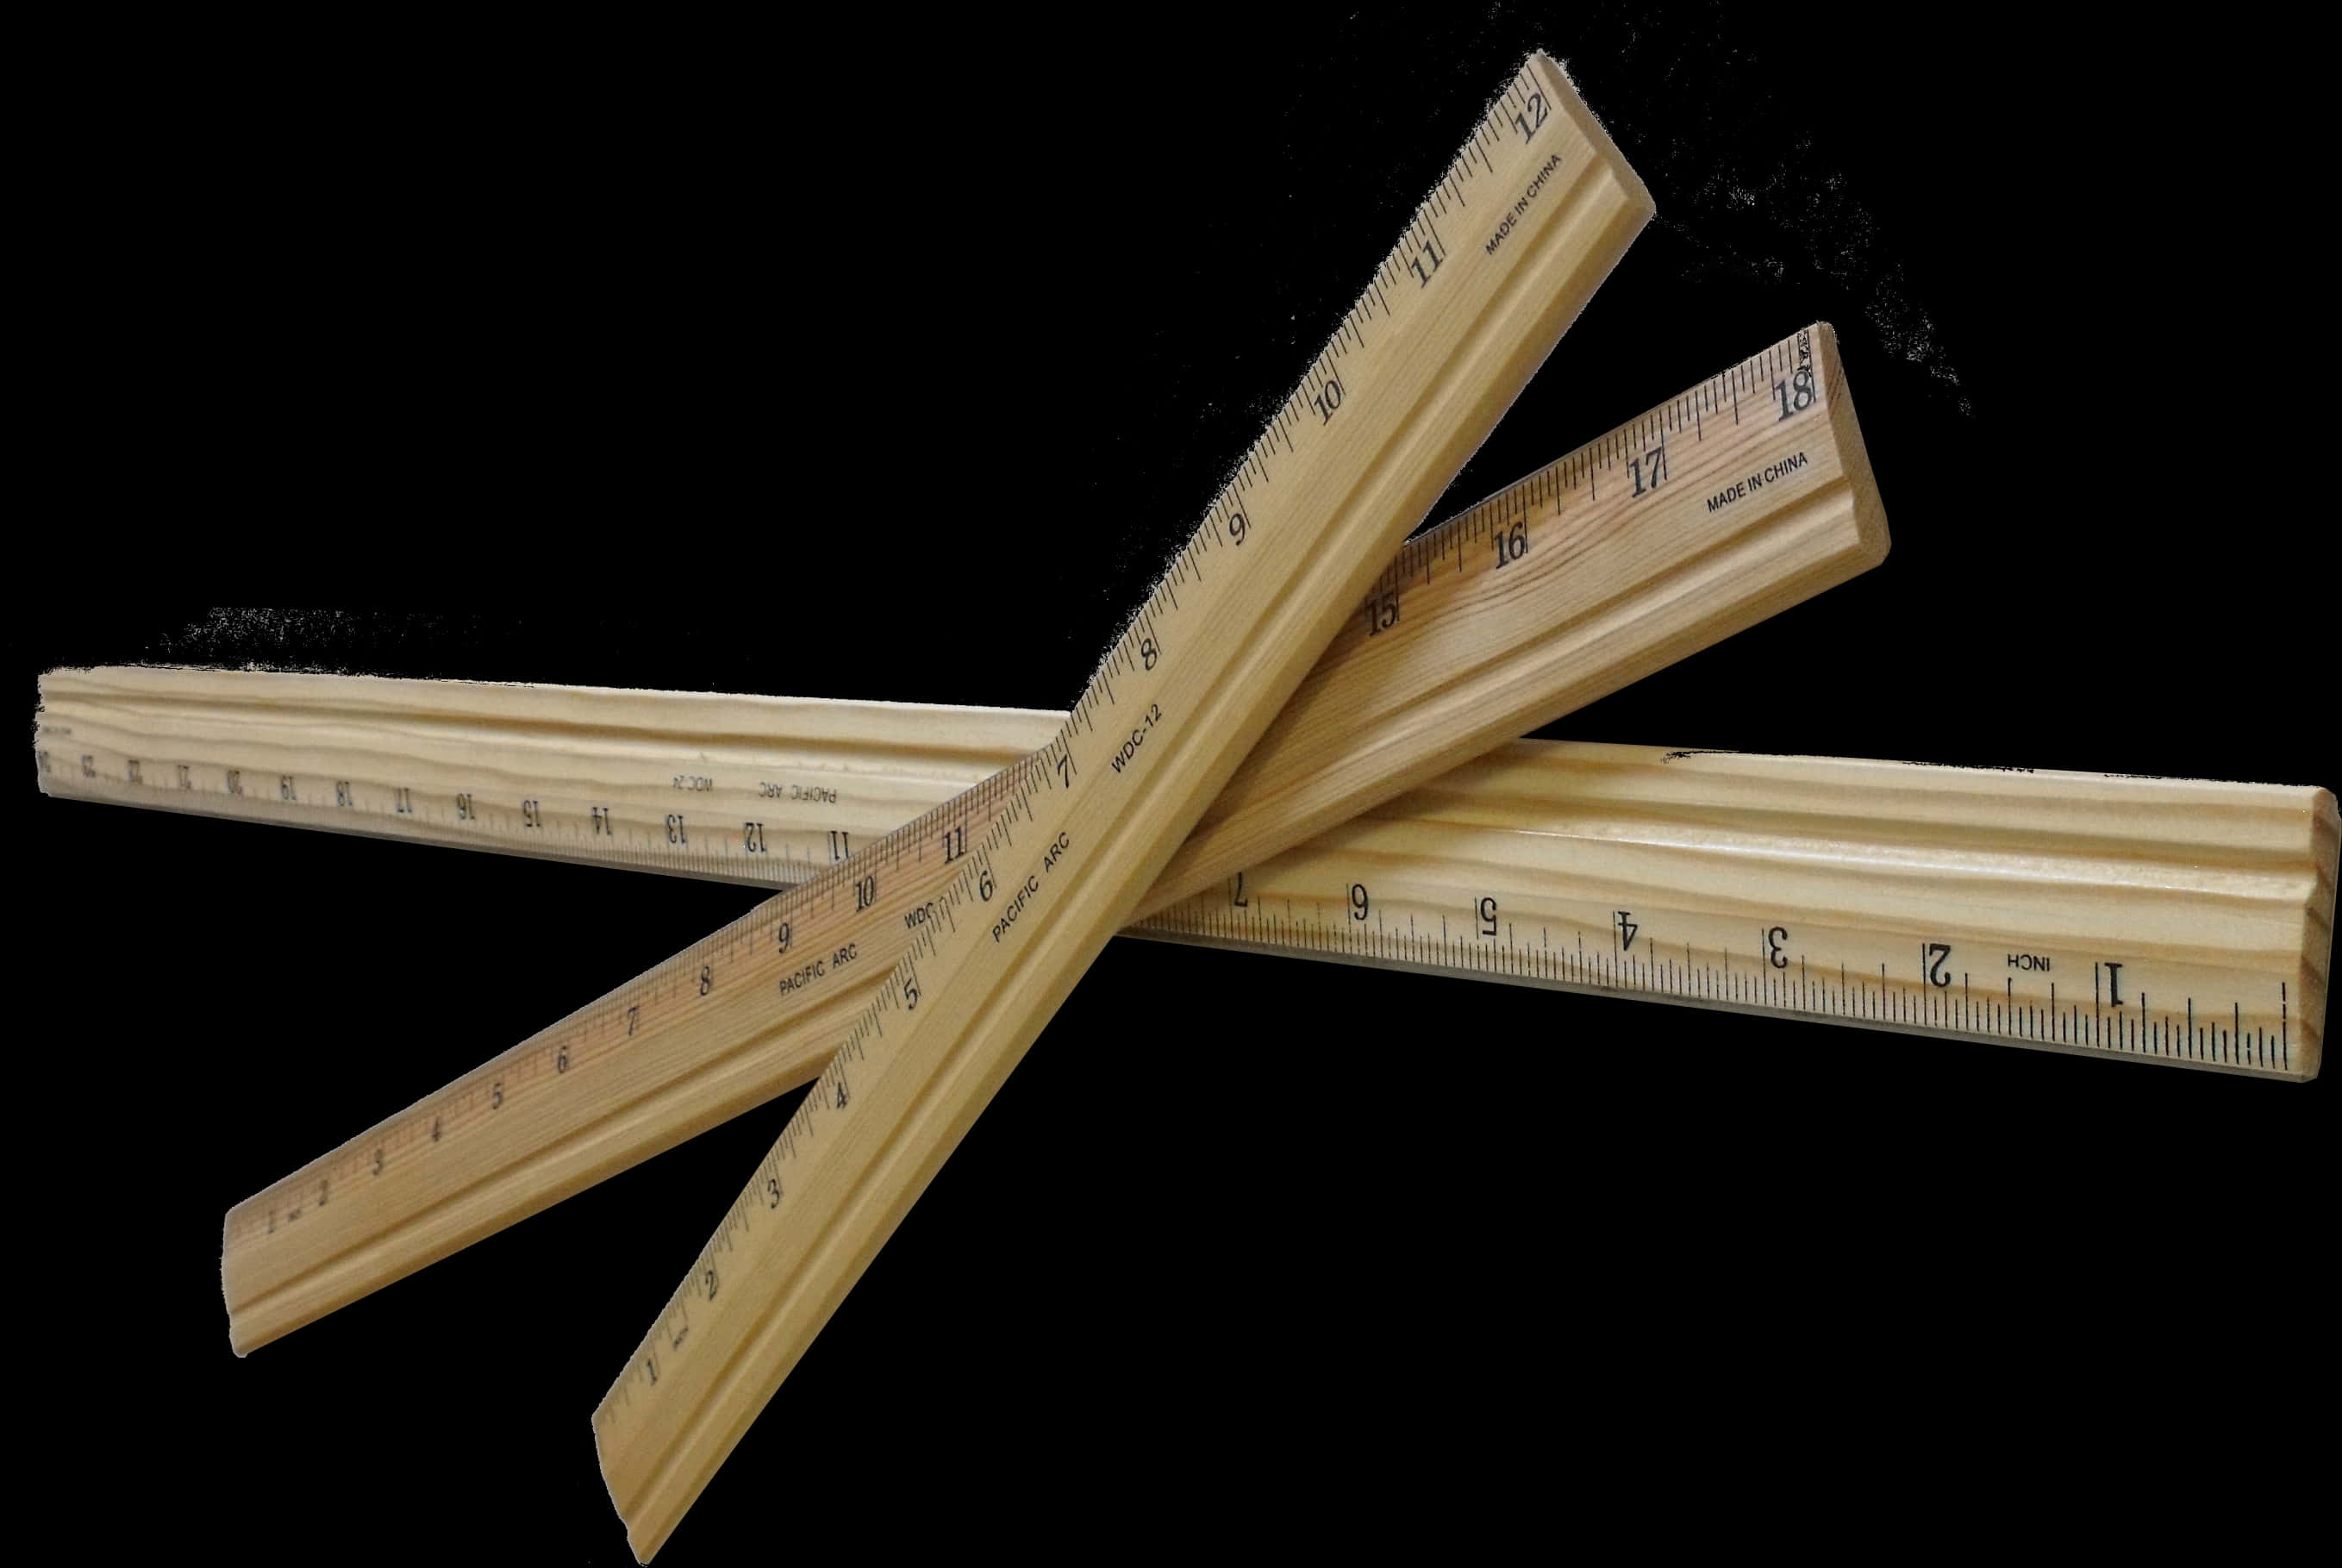 A Group Of Wooden Rulers